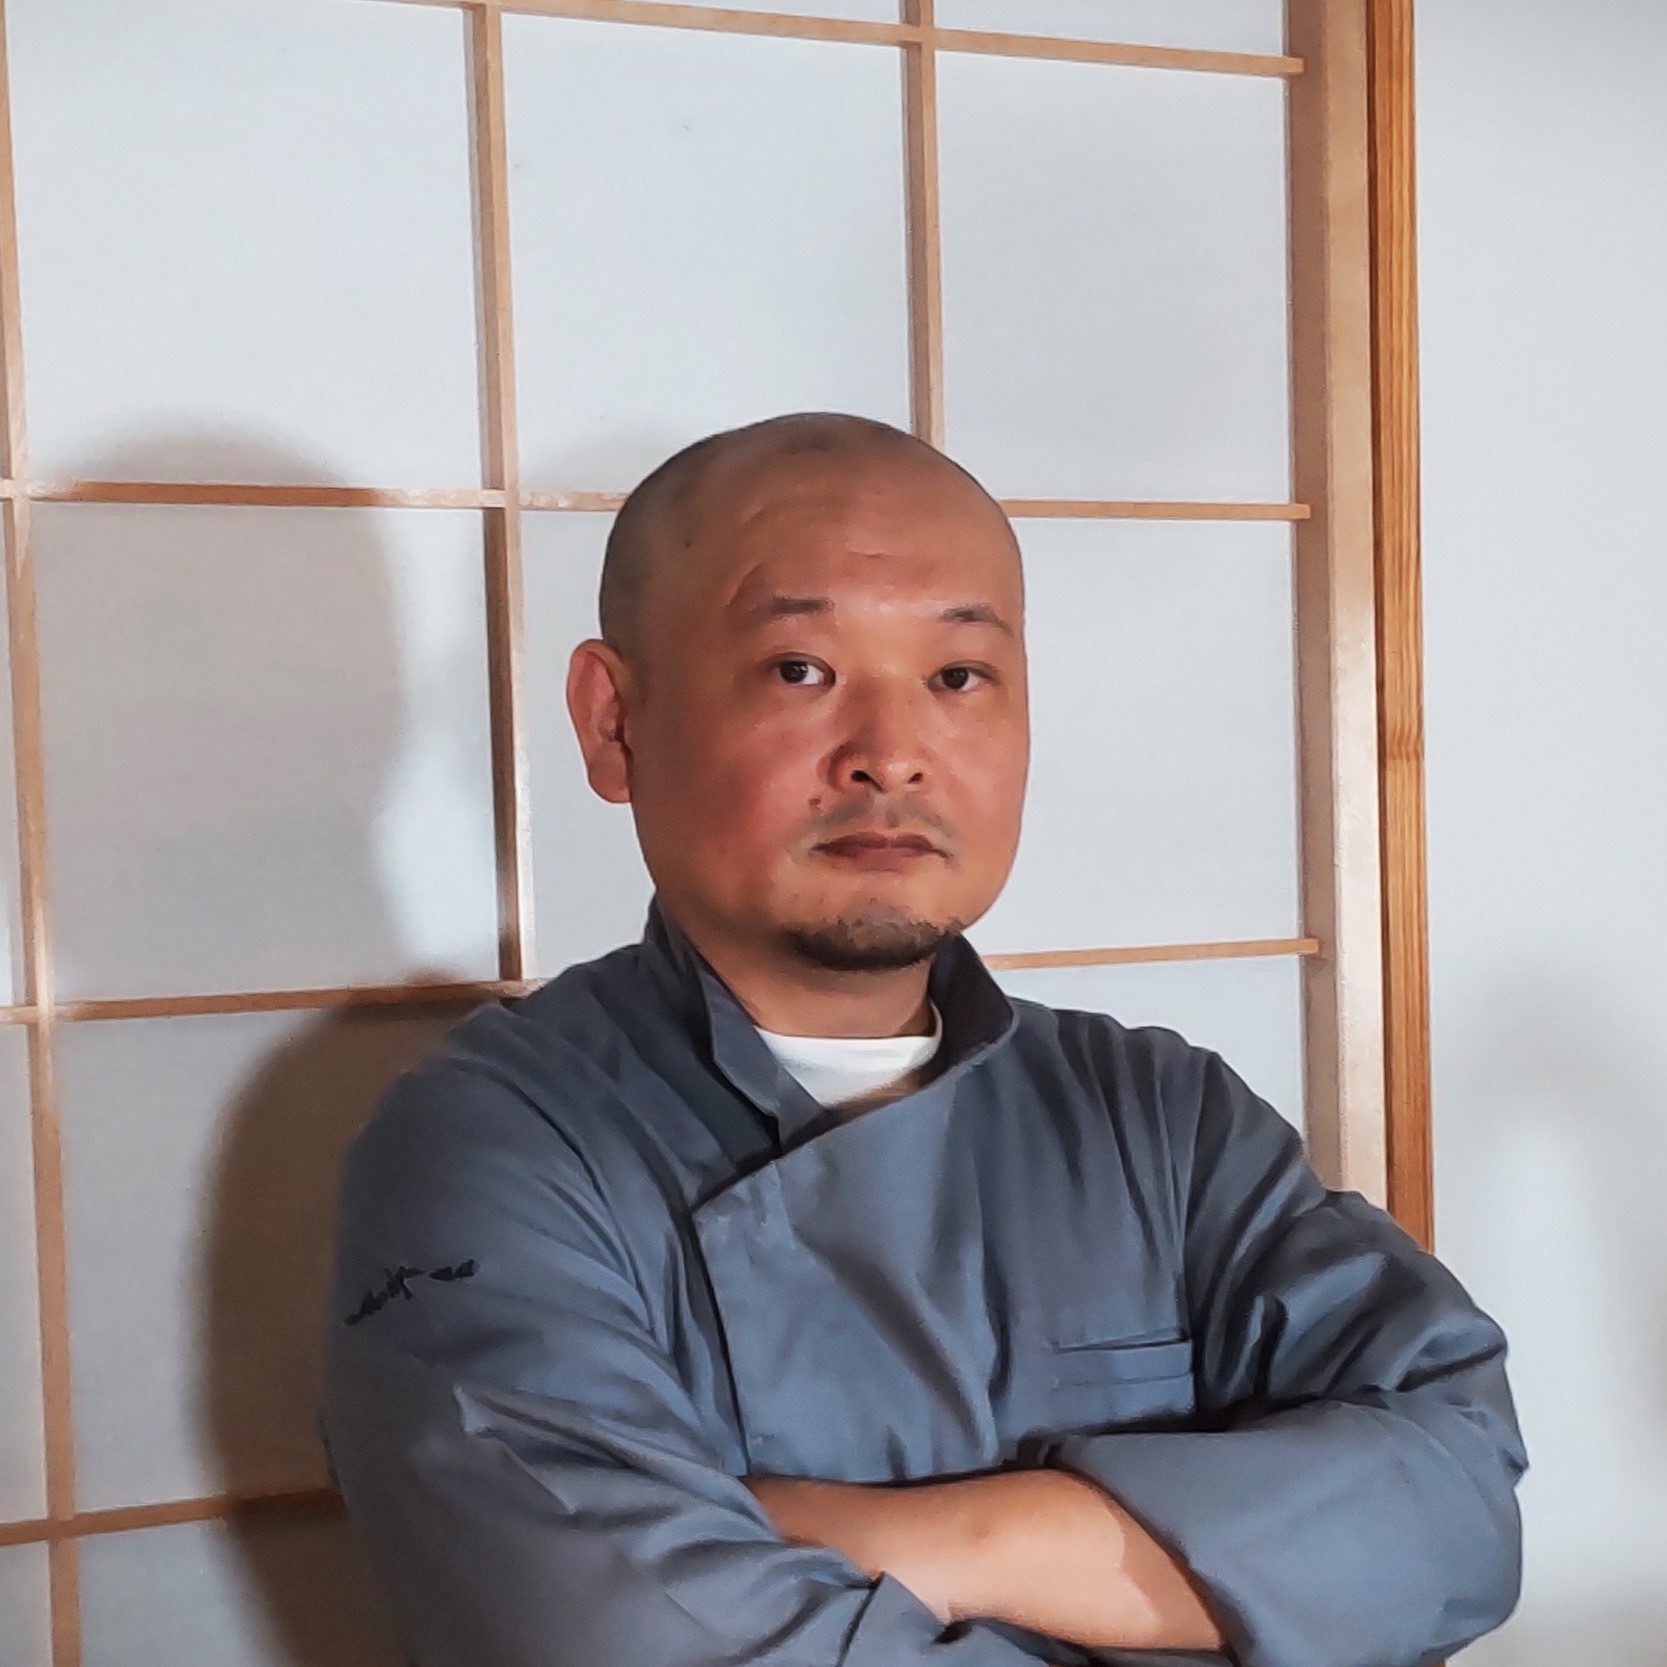 Takeshi Moriyama is a chef of traditional Japanese cuisine. He is a man of gentle speech like a clergyman, and an athlete with an inner passion.